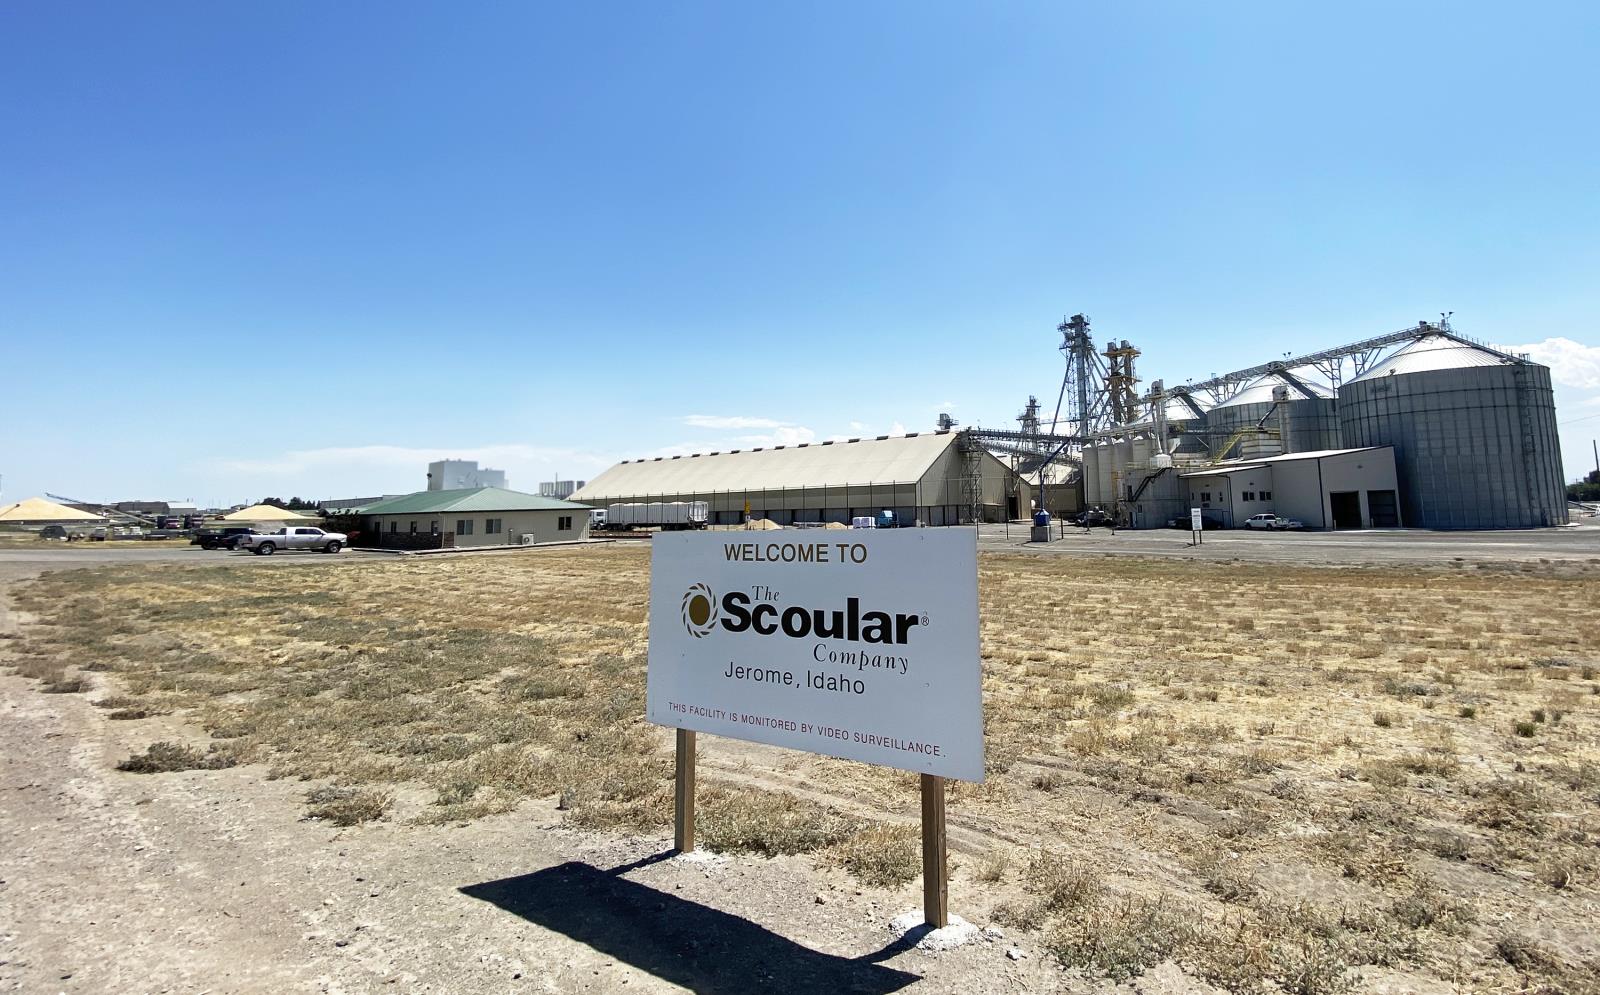 Scoular Co. has announced that Jerome will be the site of the company’s new $13 million barley processing facility. The global grain, feed and food ingredient company has several grain handling facilities in Idaho, including this one in Jerome. 